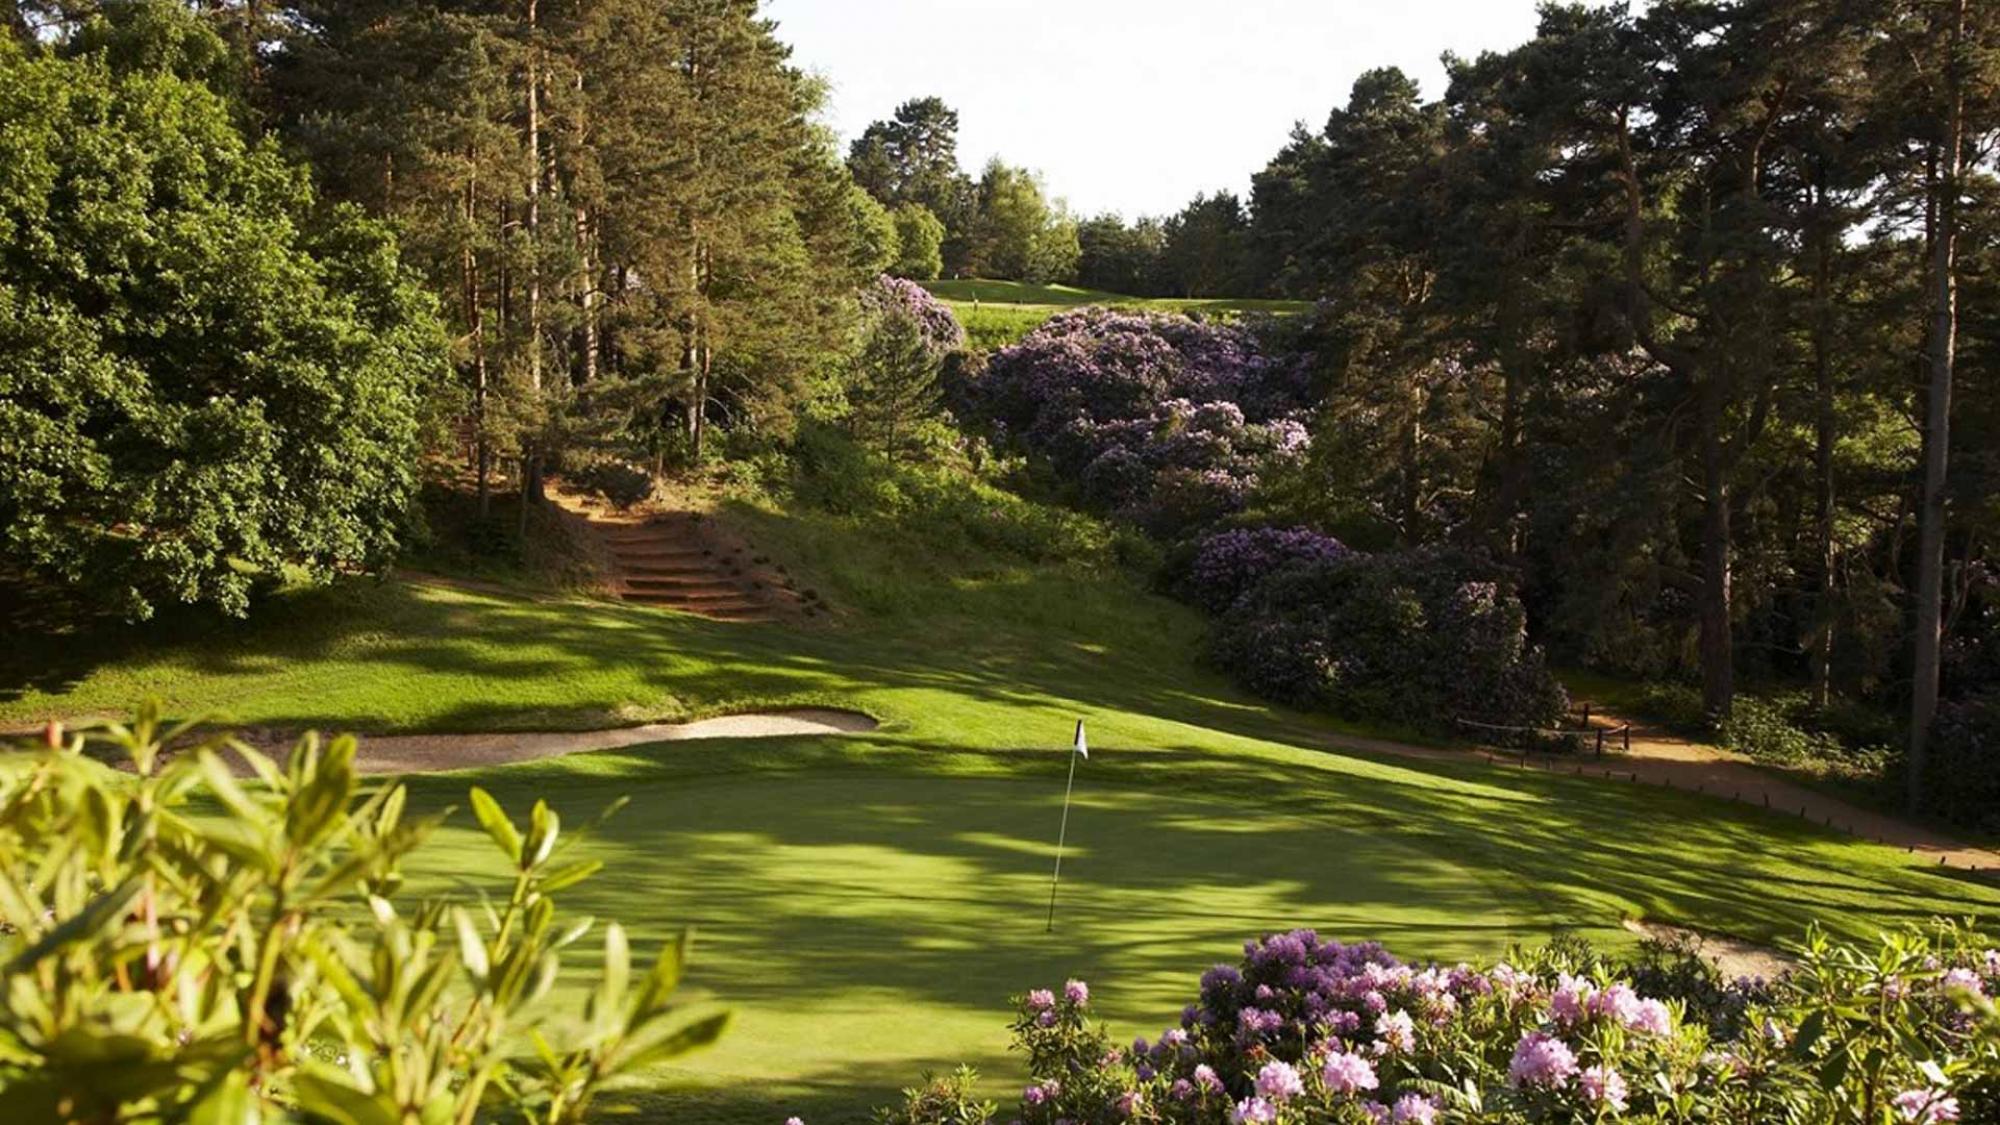 Woburn Golf Club features several of the finest golf course in Buckinghamshire